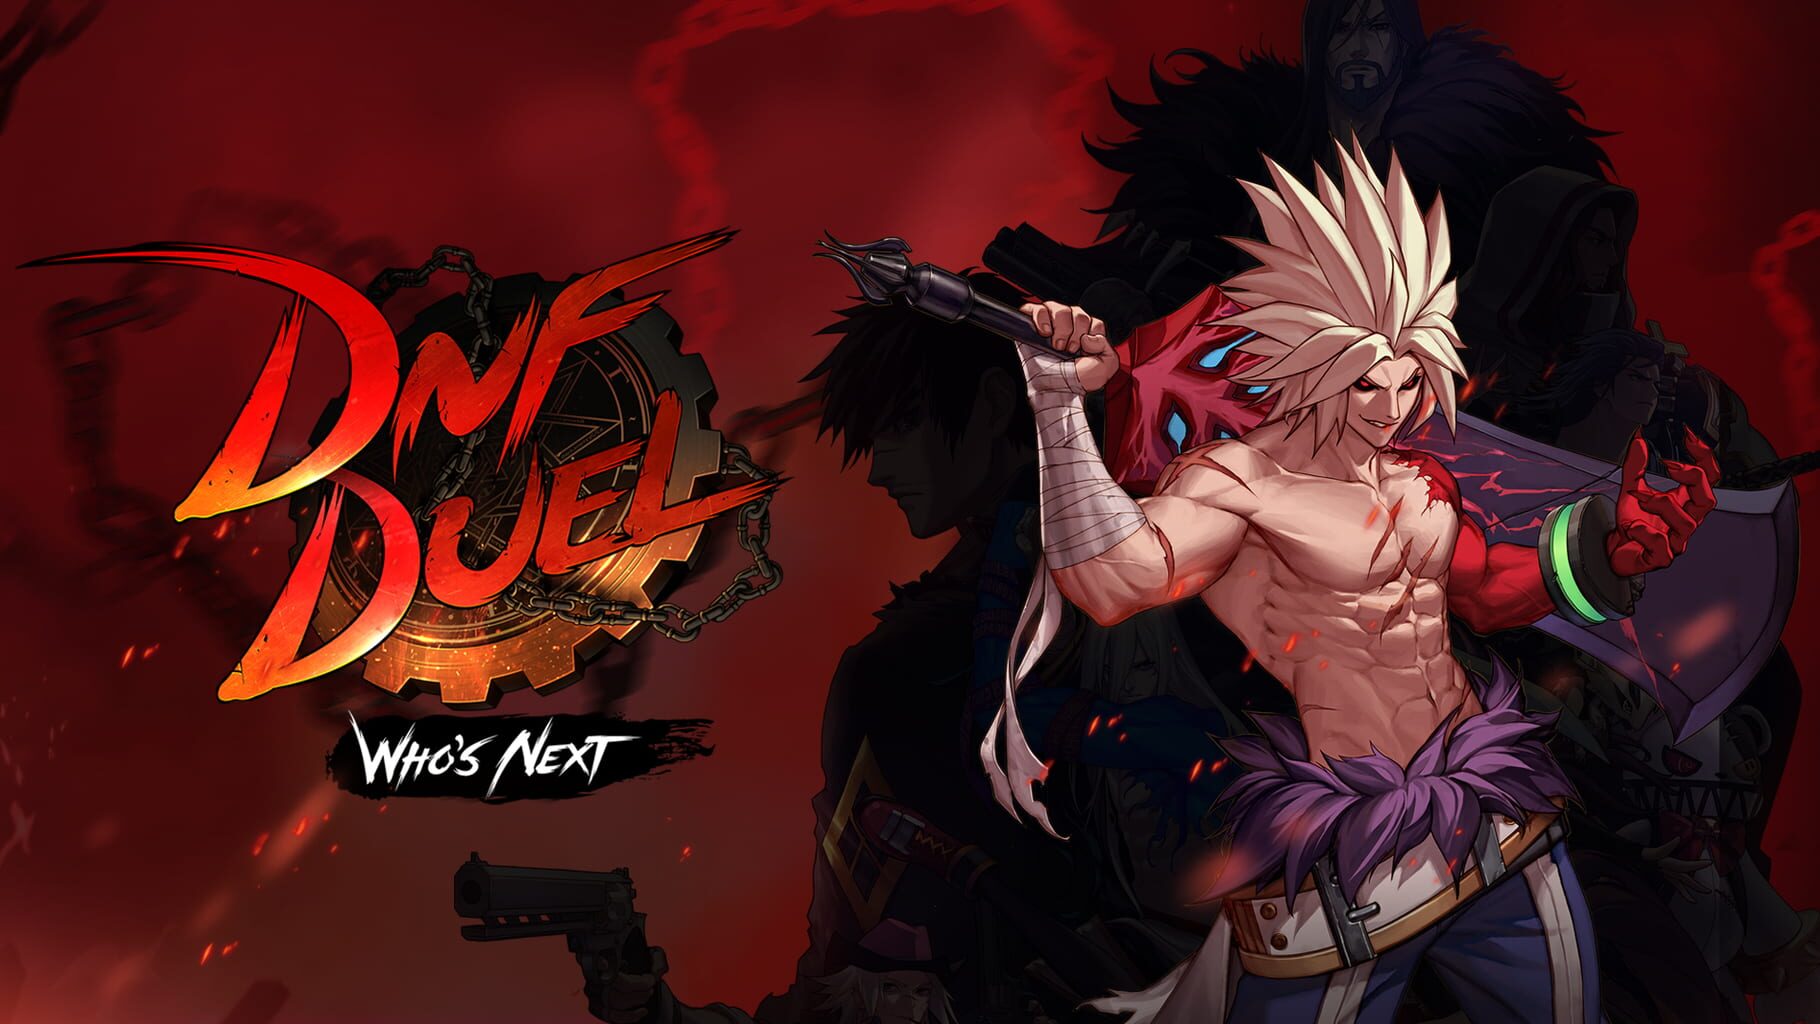 DNF Duel: Who's Next artwork